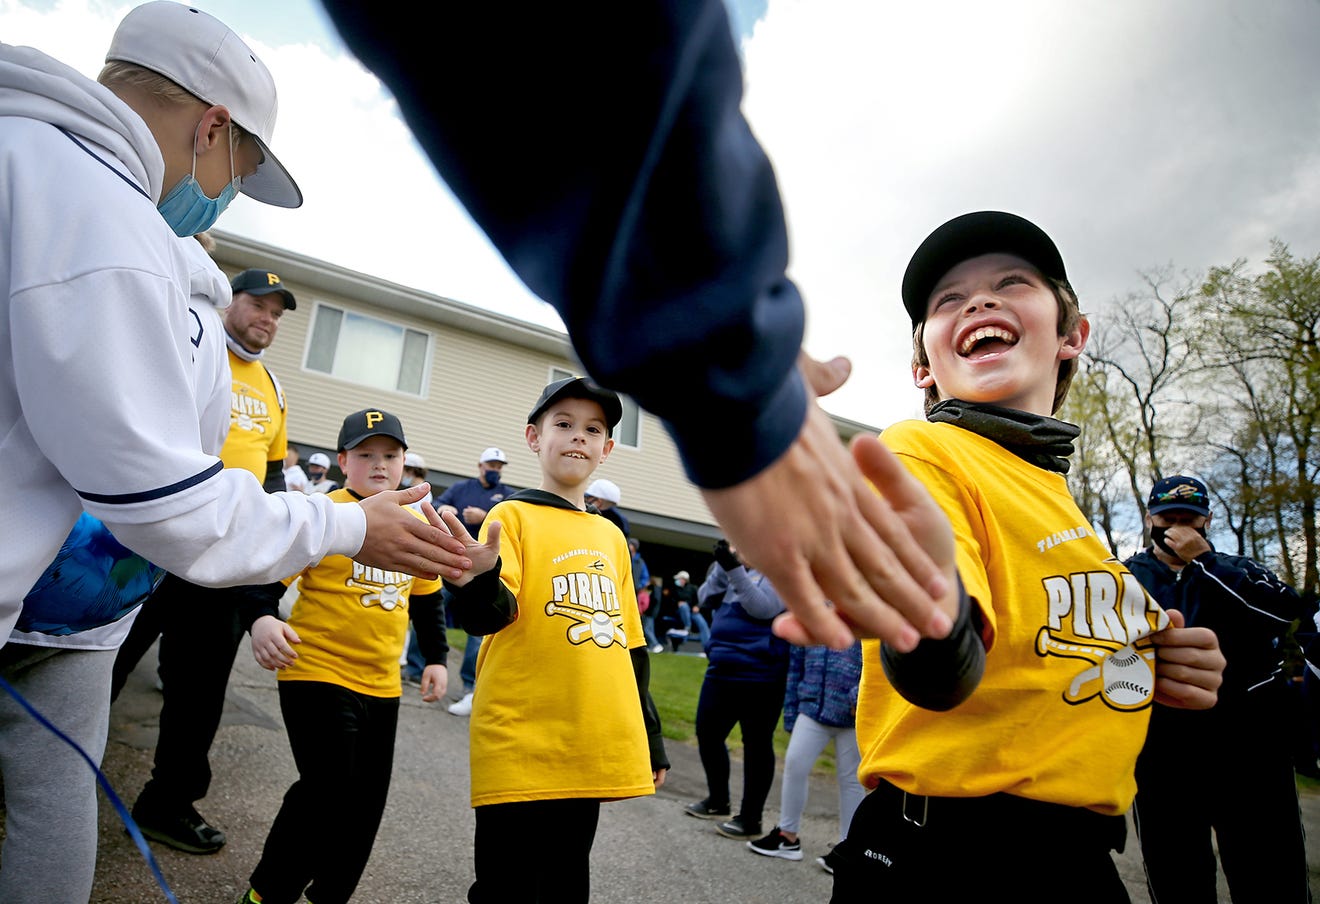 Tallmadge Little League parade first in city since pandemic.